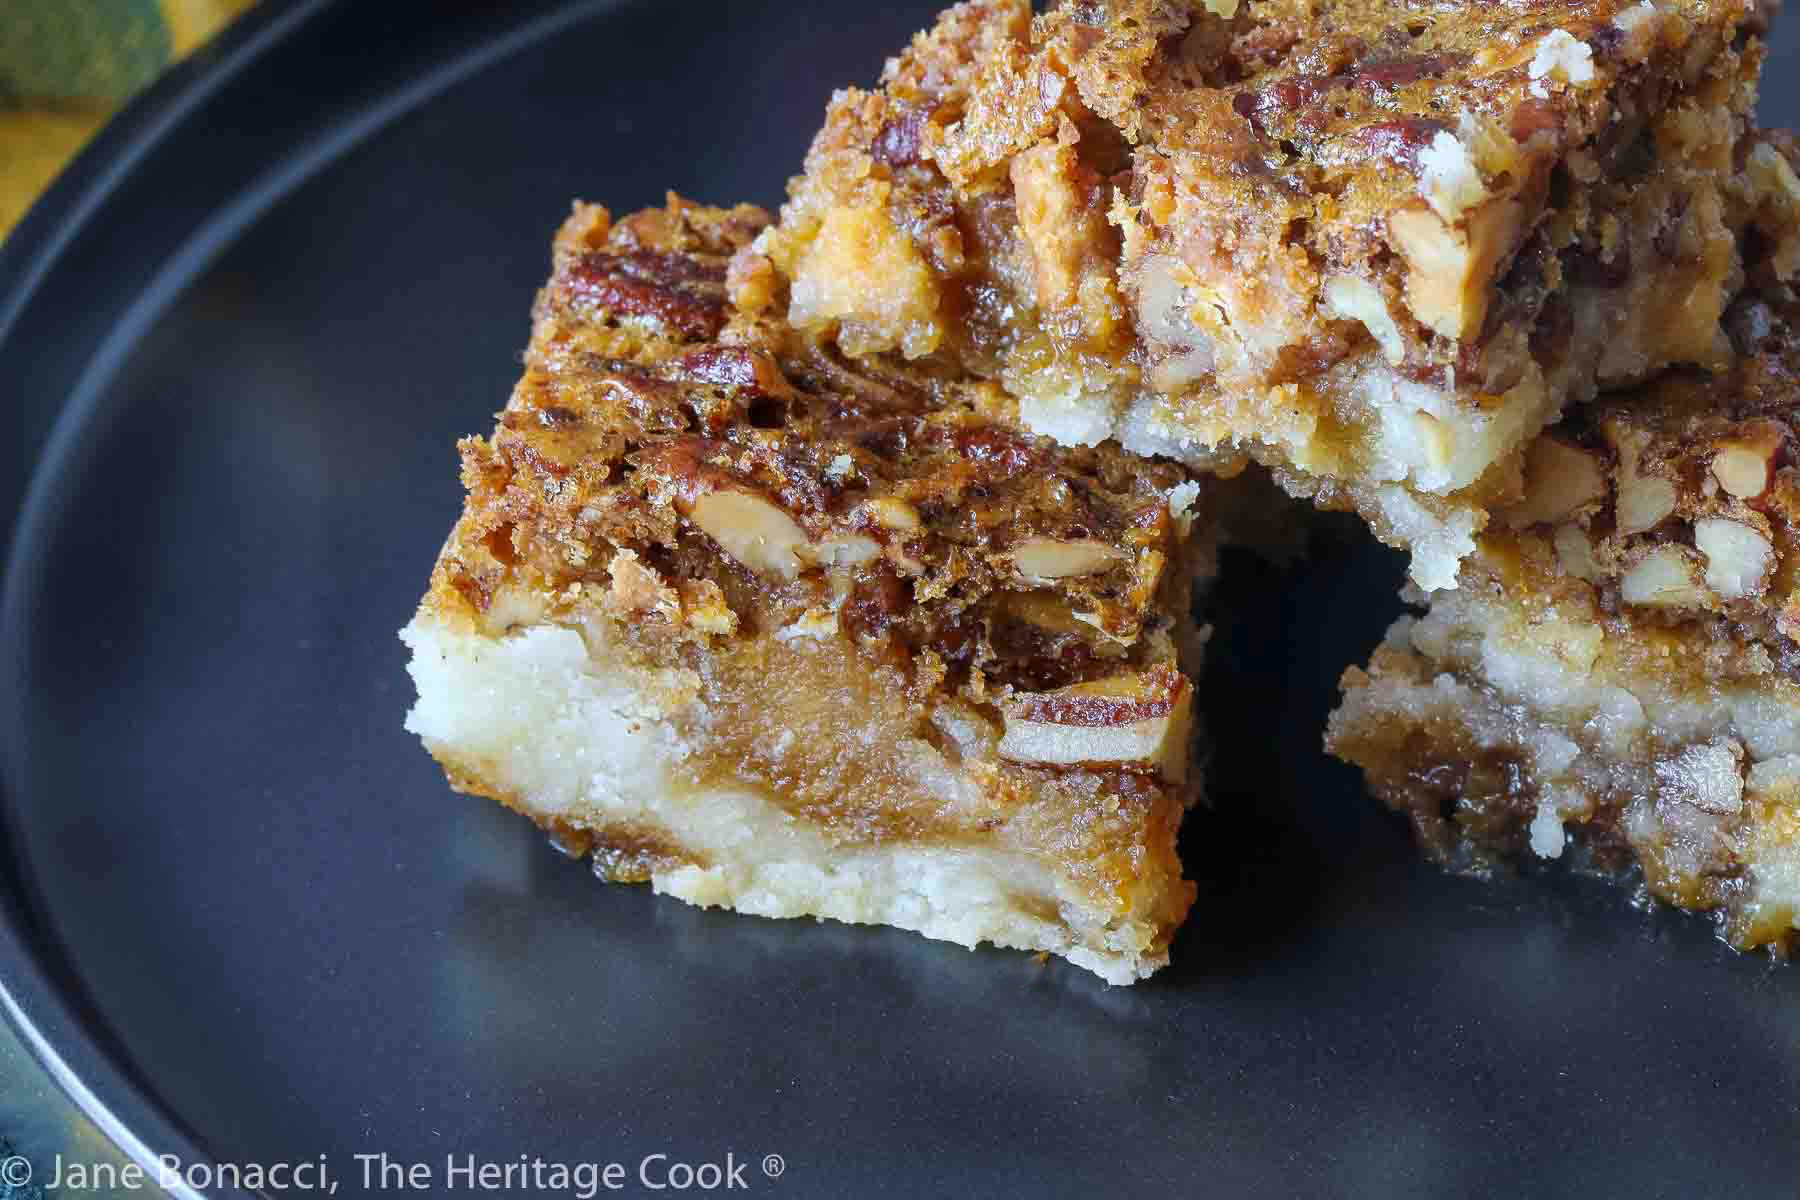 Stack of 4 Pecan Pie Bars on a black plate with a colorful plaid cloth underneath and behind © 2023 Jane Bonacci, The Heritage Cook.